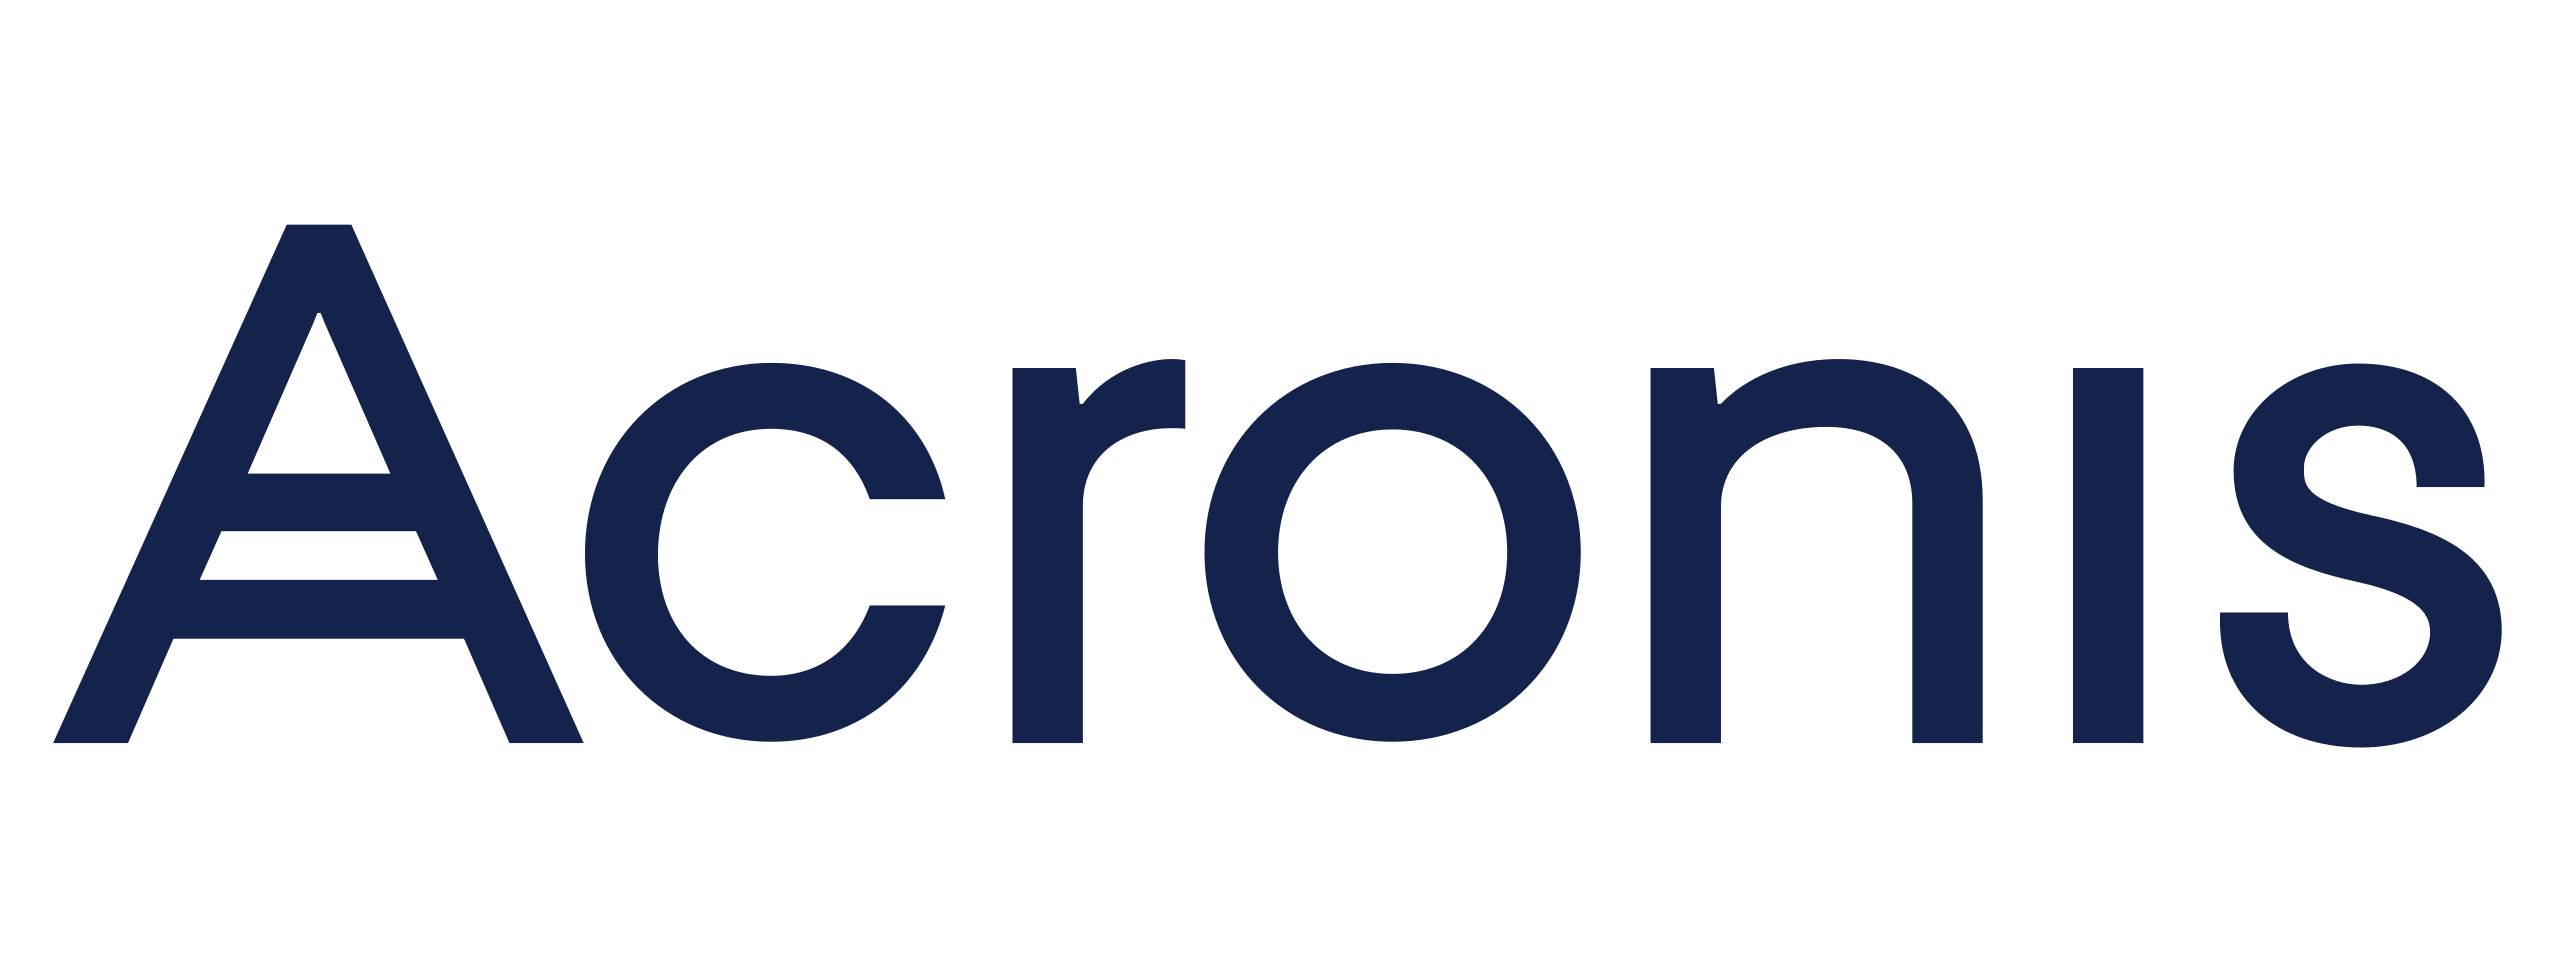 Read more about the article Acronis